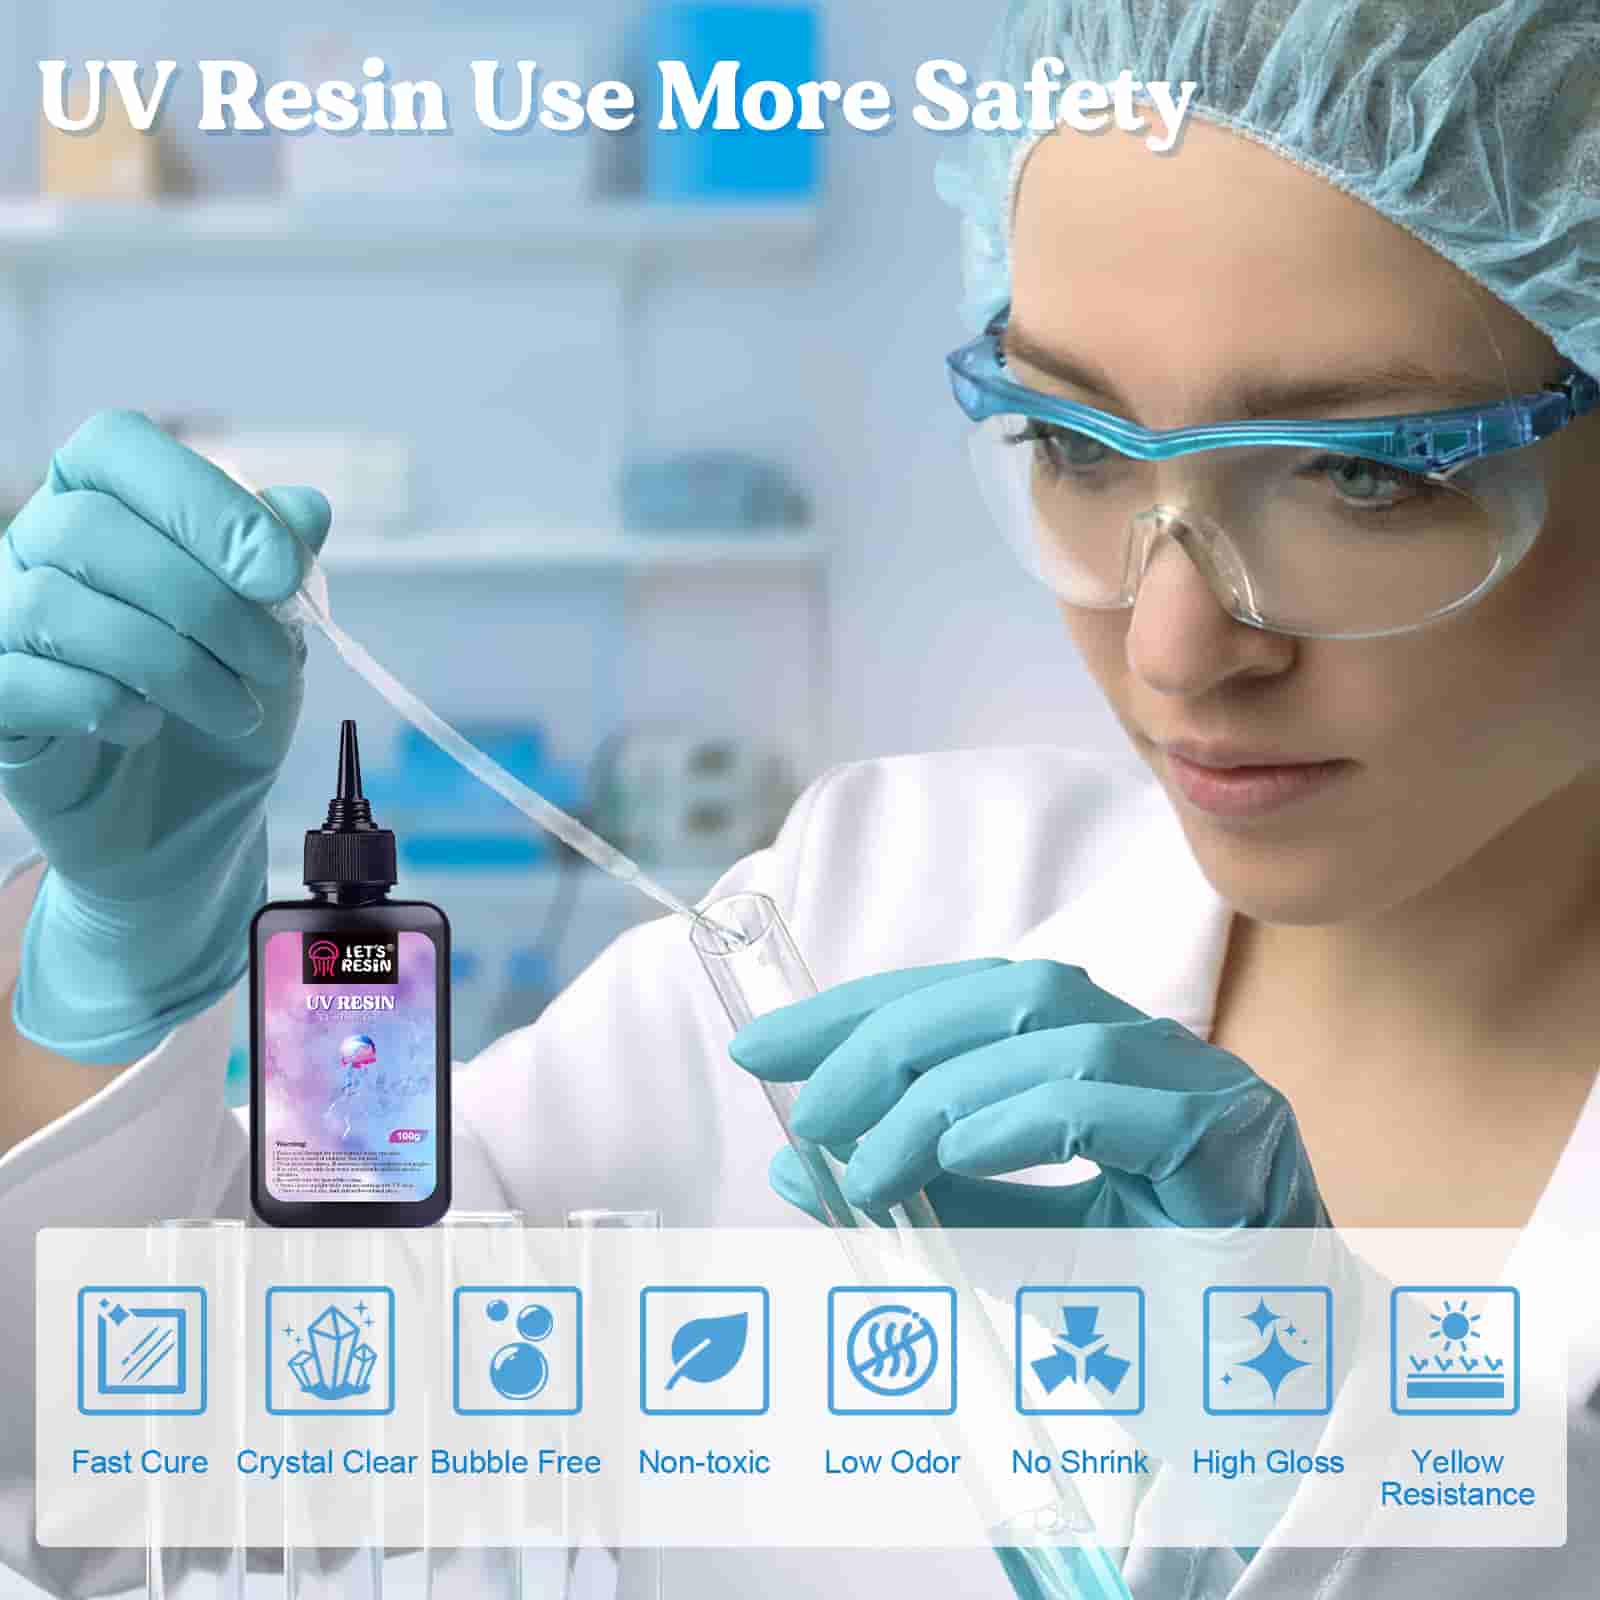 LET'S RESIN UV Resin 200g Crystal Clear Ultraviolet Epoxy Resin  Quick-Curing&Low Shrinkage UV Resin Kit for Crafts Jewelry Making  Coating&Casting